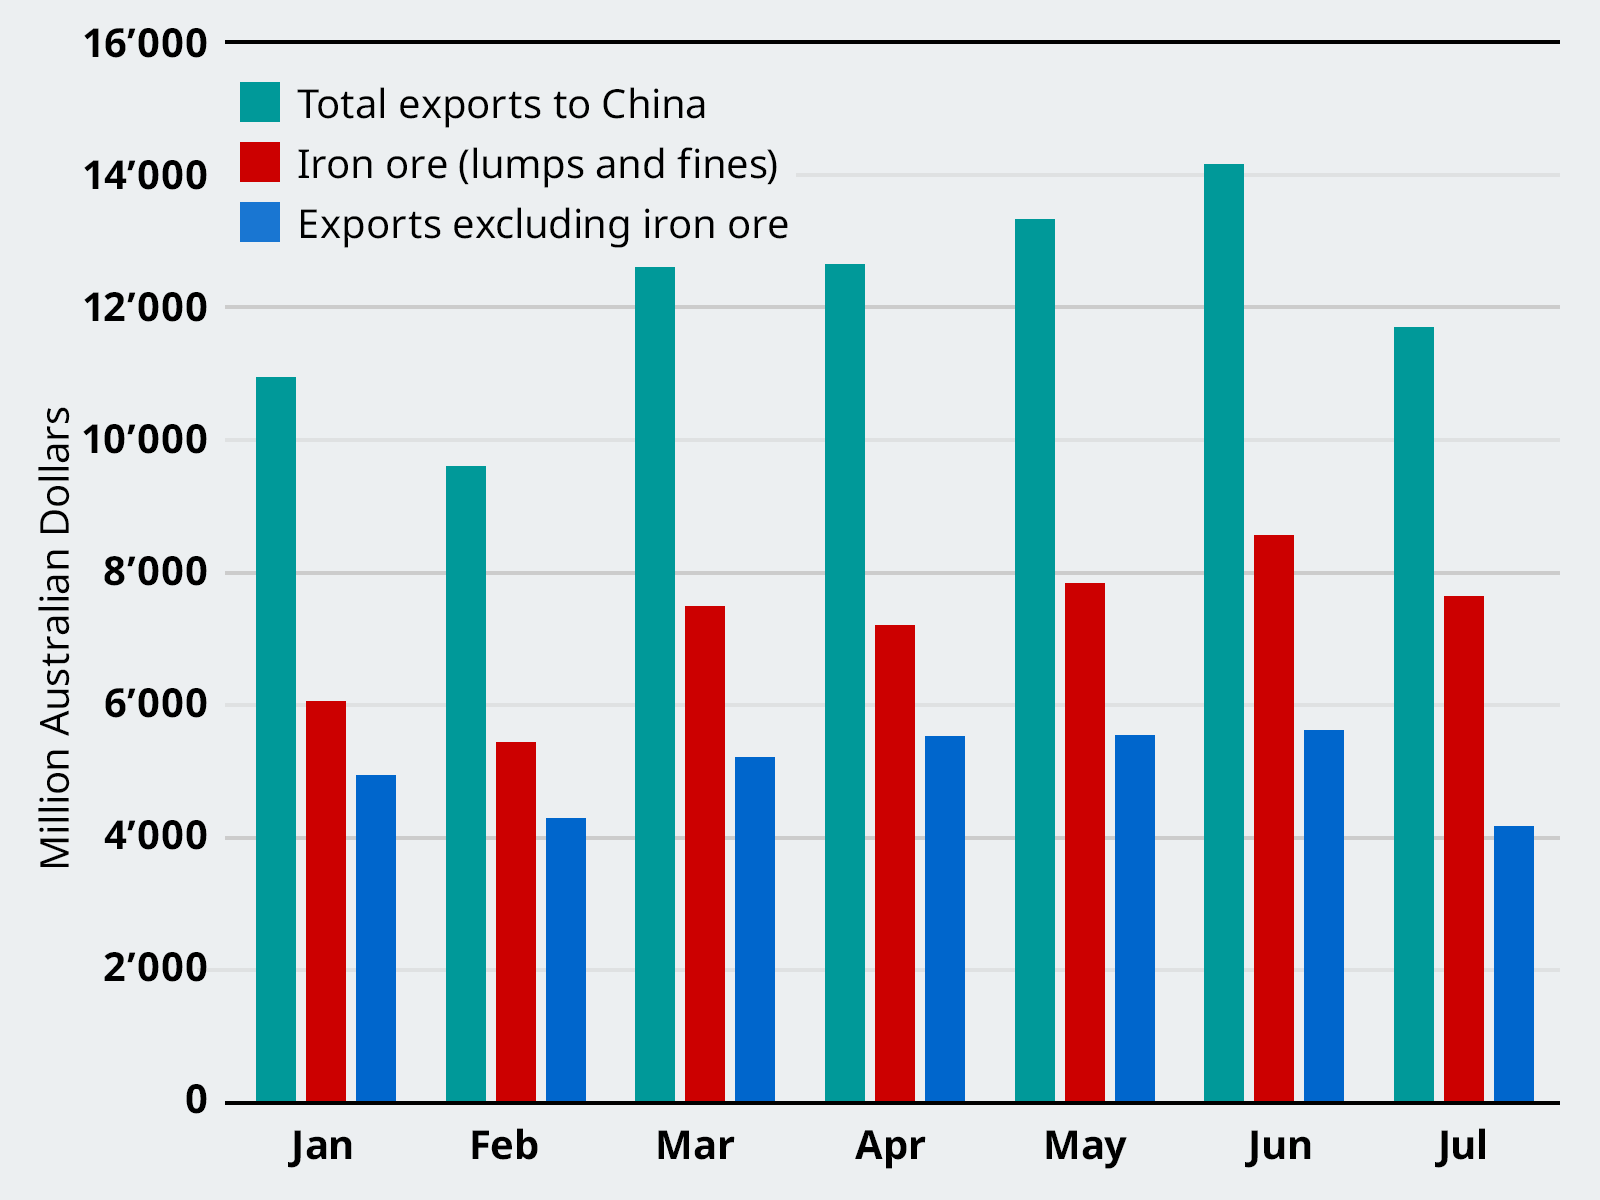 Exports of Goods to China, January to July 2020